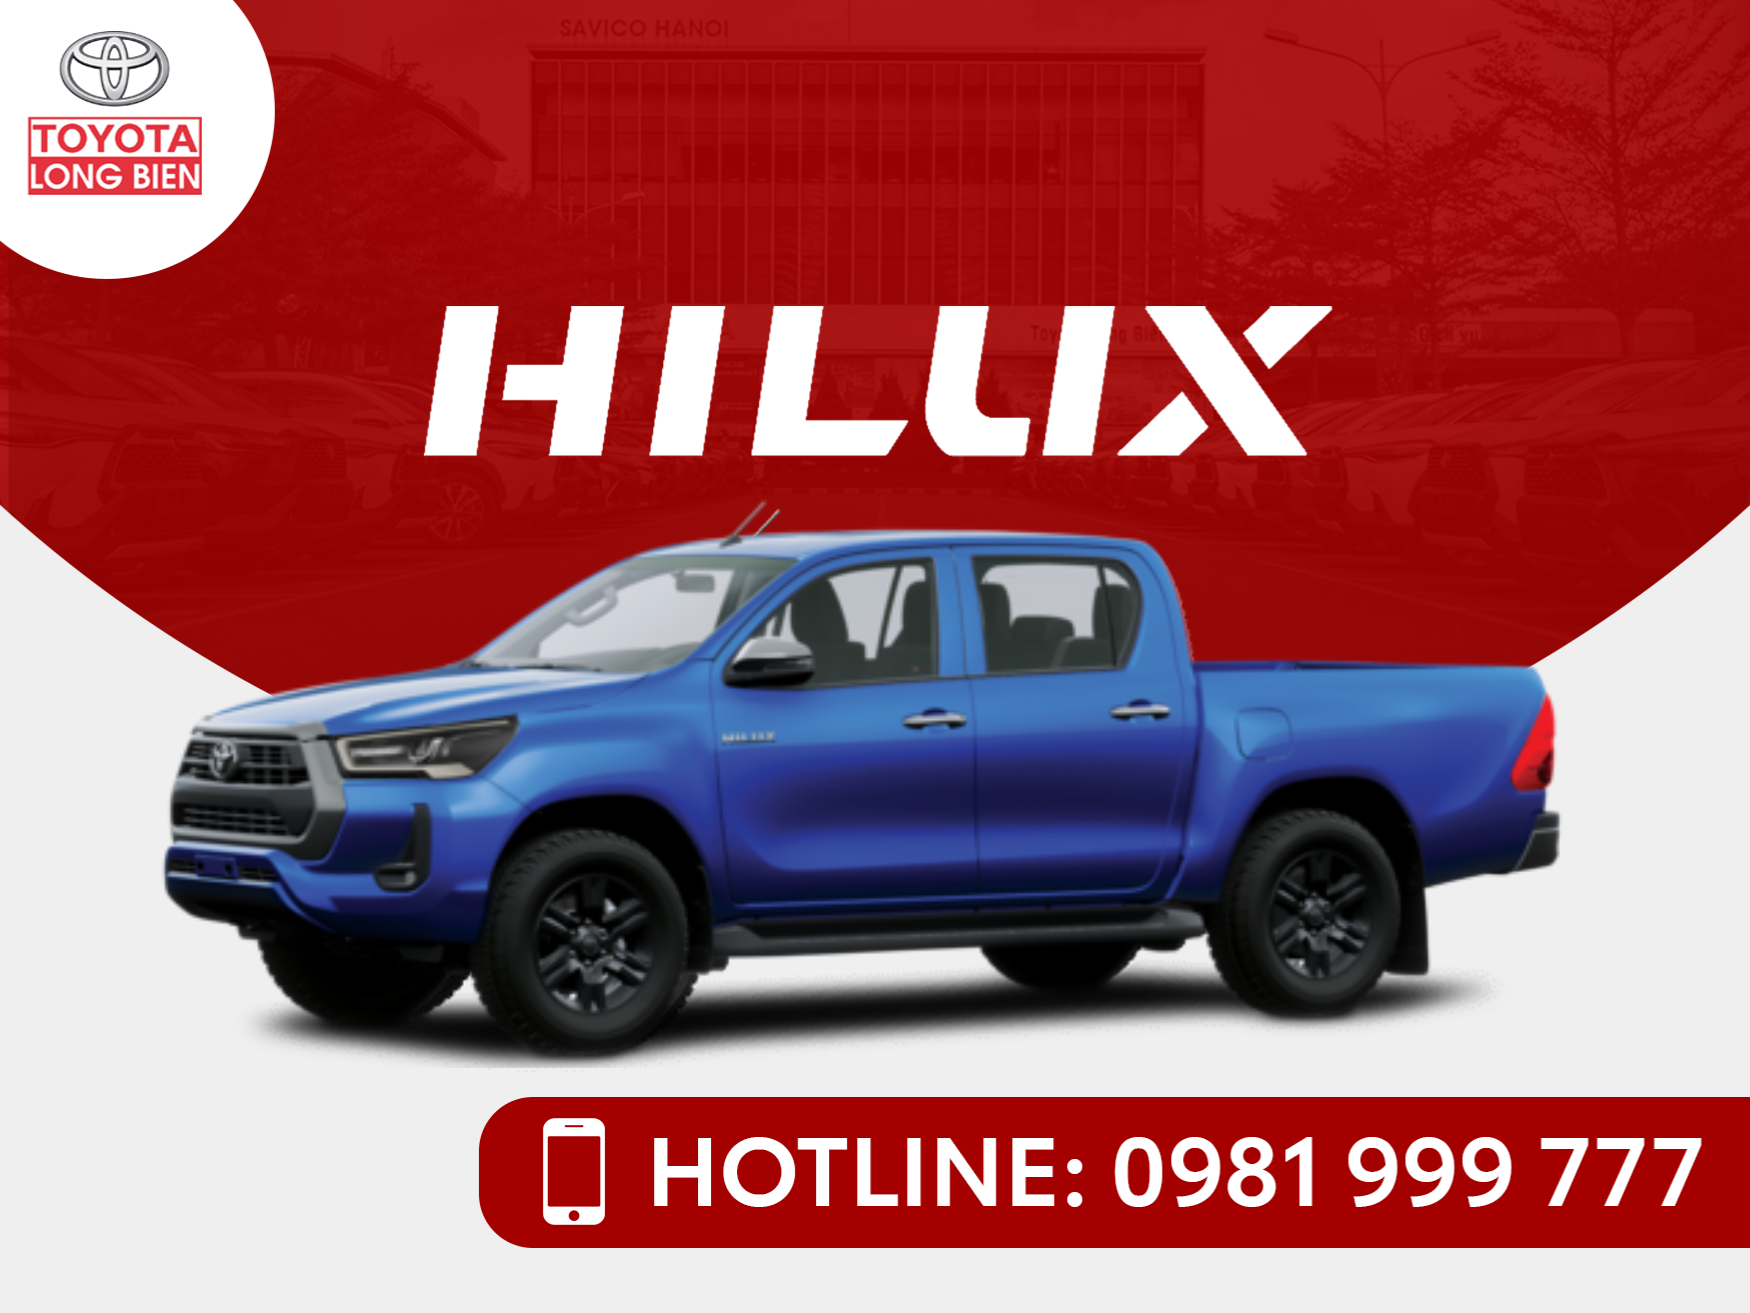 hilux-24l-4x2-at-1680165367.png